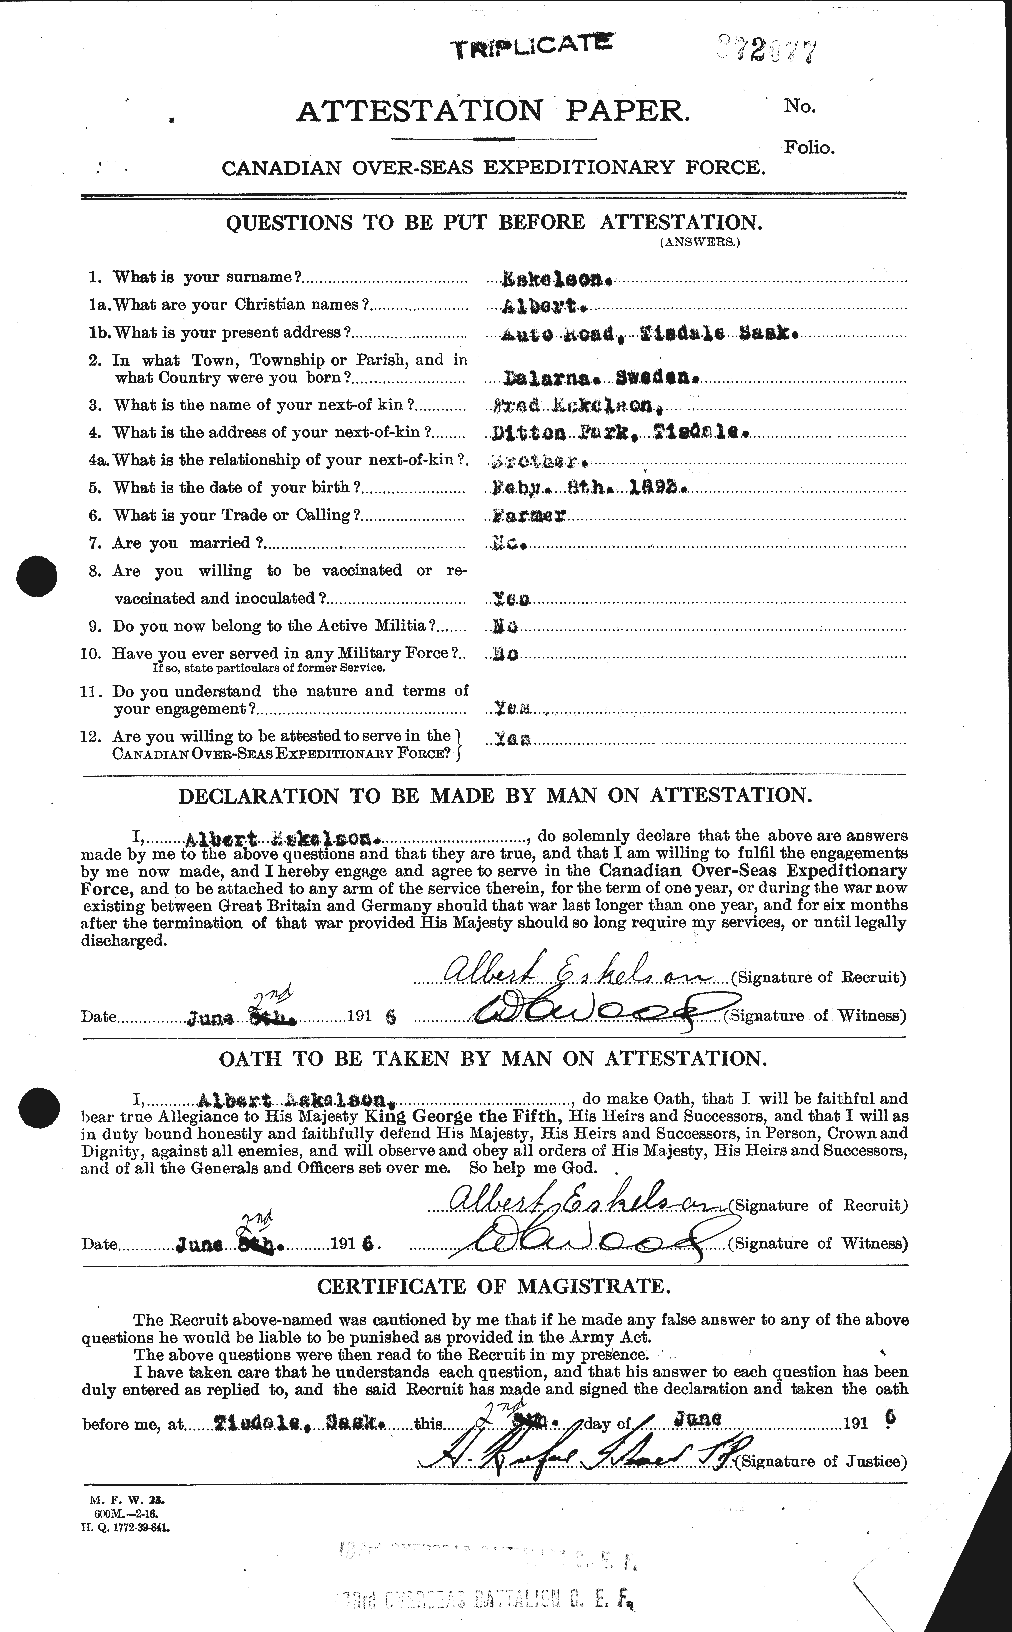 Personnel Records of the First World War - CEF 316581a